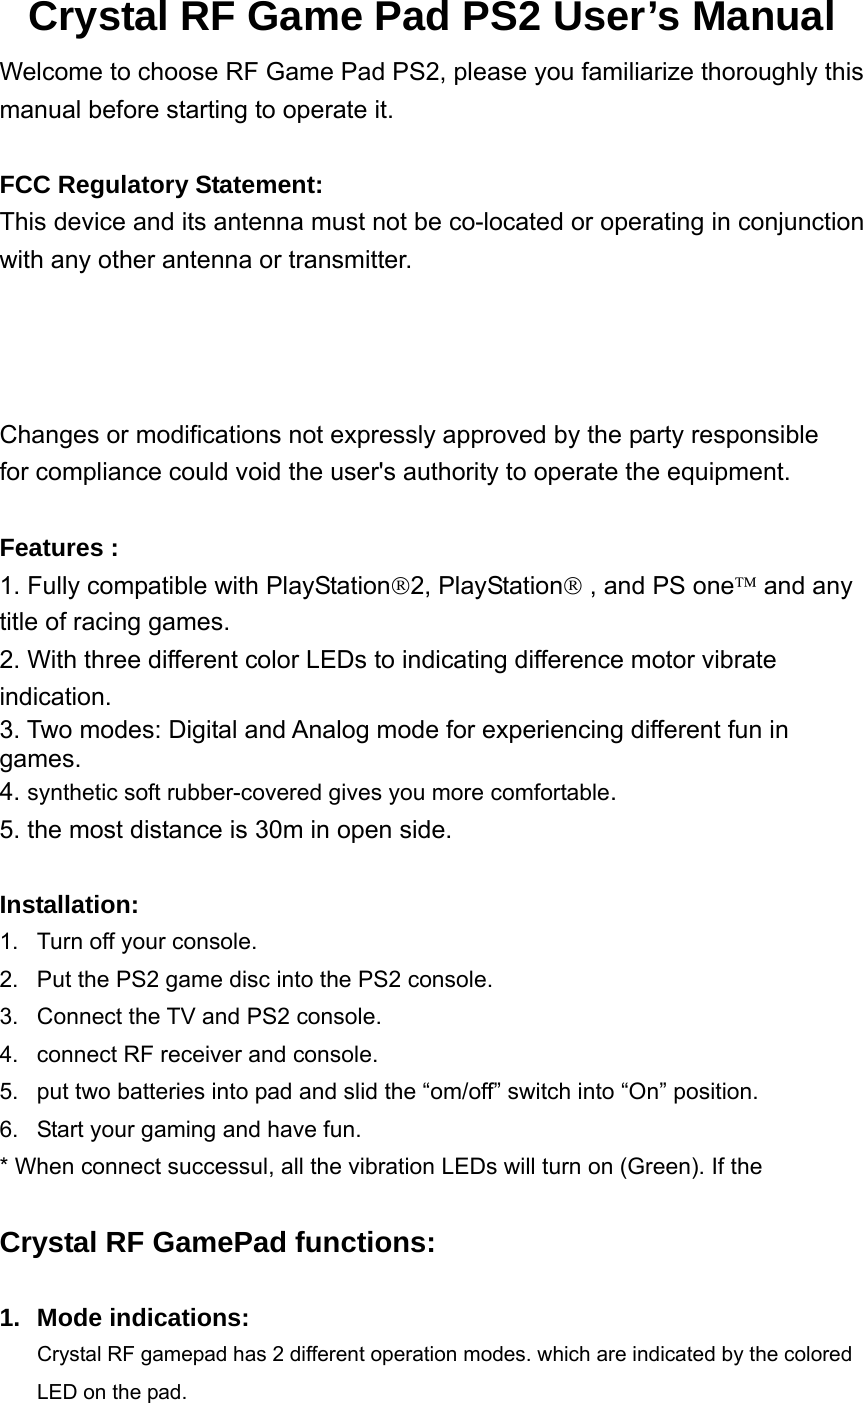 Crystal RF Game Pad PS2 User’s Manual Welcome to choose RF Game Pad PS2, please you familiarize thoroughly this manual before starting to operate it.  FCC Regulatory Statement: This device and its antenna must not be co-located or operating in conjunction with any other antenna or transmitter. Changes or modifications not expressly approved by the party responsible   for compliance could void the user&apos;s authority to operate the equipment.  Features : 1. Fully compatible with PlayStation®2, PlayStation® , and PS one™ and any title of racing games. 2. With three different color LEDs to indicating difference motor vibrate indication. 3. Two modes: Digital and Analog mode for experiencing different fun in games. 4. synthetic soft rubber-covered gives you more comfortable. 5. the most distance is 30m in open side.     Installation:  1.  Turn off your console. 2.  Put the PS2 game disc into the PS2 console. 3.  Connect the TV and PS2 console. 4.  connect RF receiver and console. 5.  put two batteries into pad and slid the “om/off” switch into “On” position.   6.  Start your gaming and have fun. * When connect successul, all the vibration LEDs will turn on (Green). If the      Crystal RF GamePad functions:  1. Mode indications: Crystal RF gamepad has 2 different operation modes. which are indicated by the colored LED on the pad.   